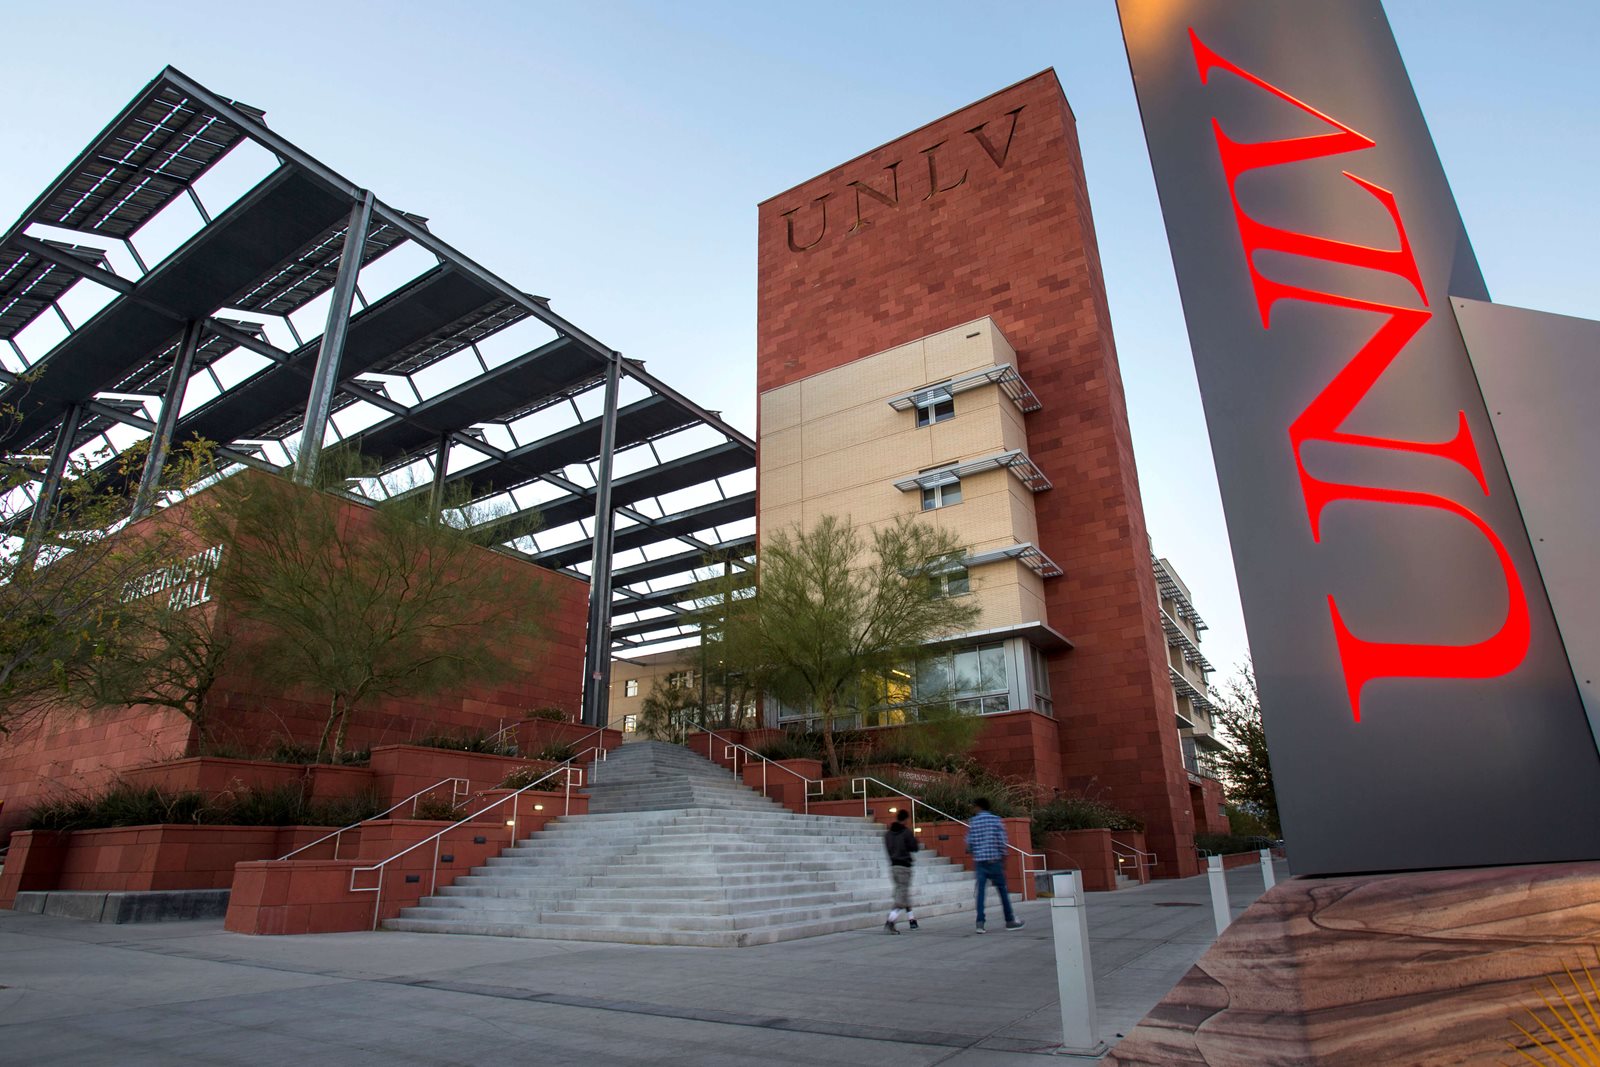 UNLV campus with UNLV sign prominent